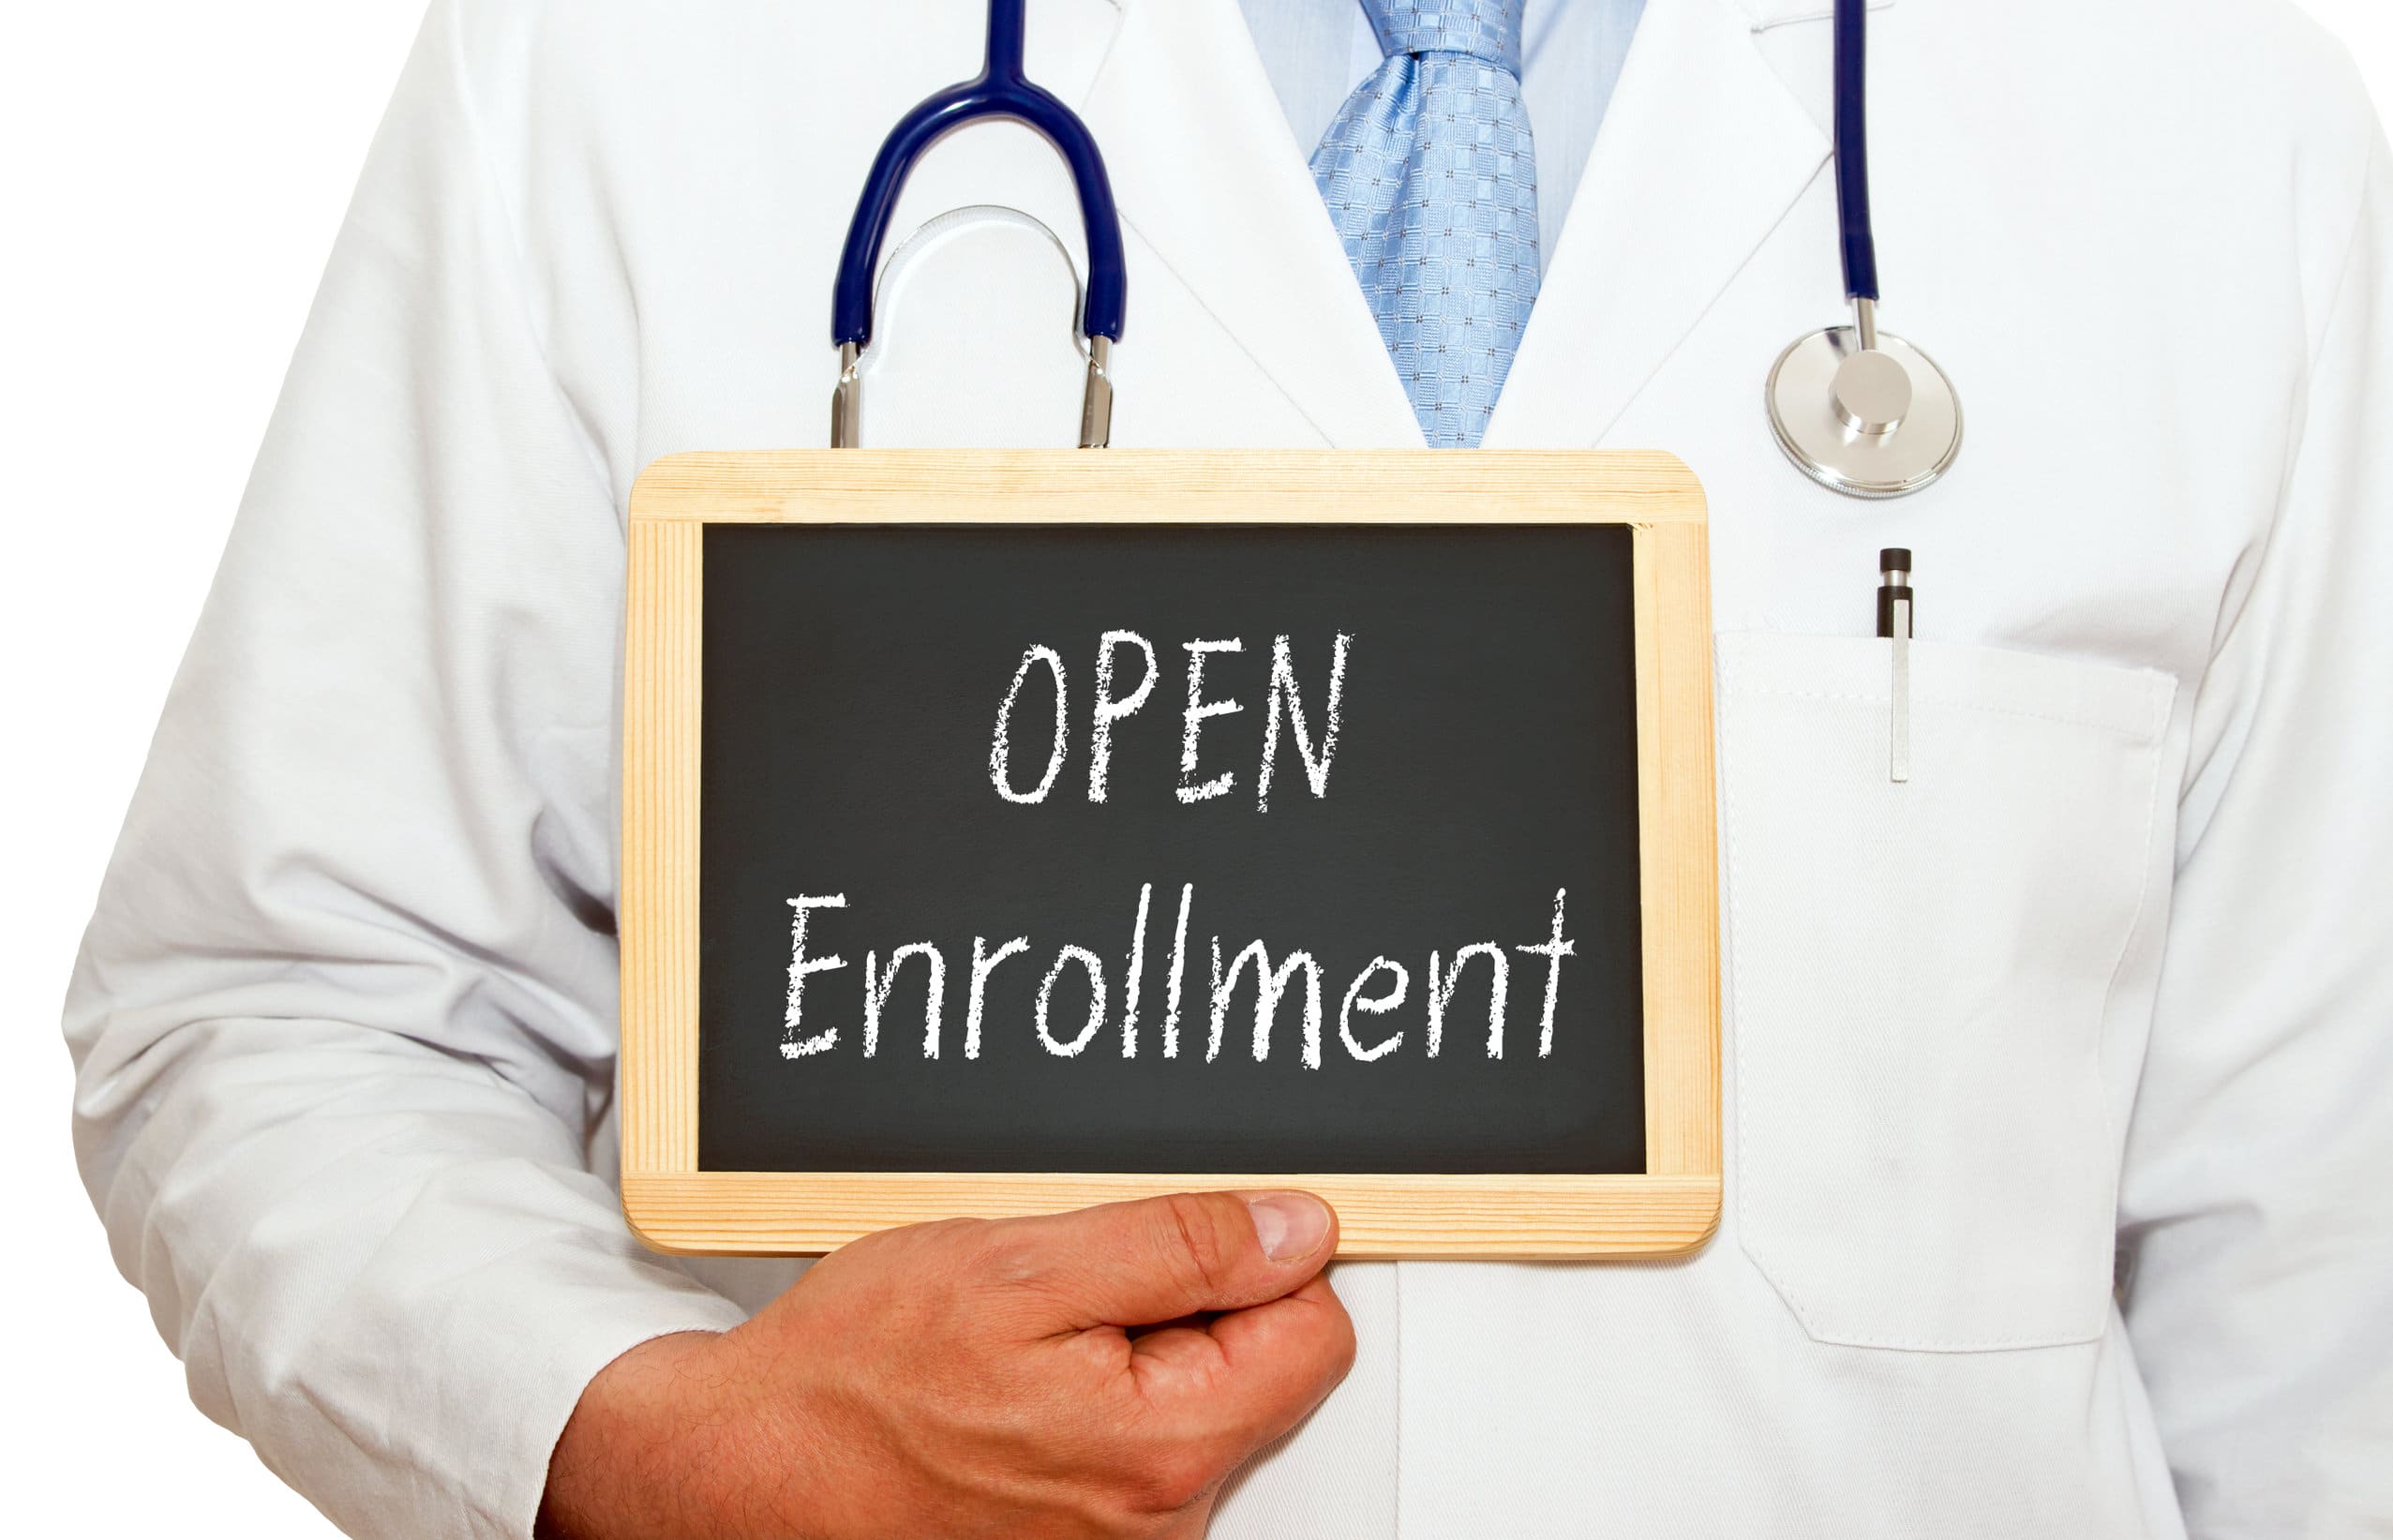 Doctor wearing a white coat and holding a chalkboard that says "Open Enrollment"